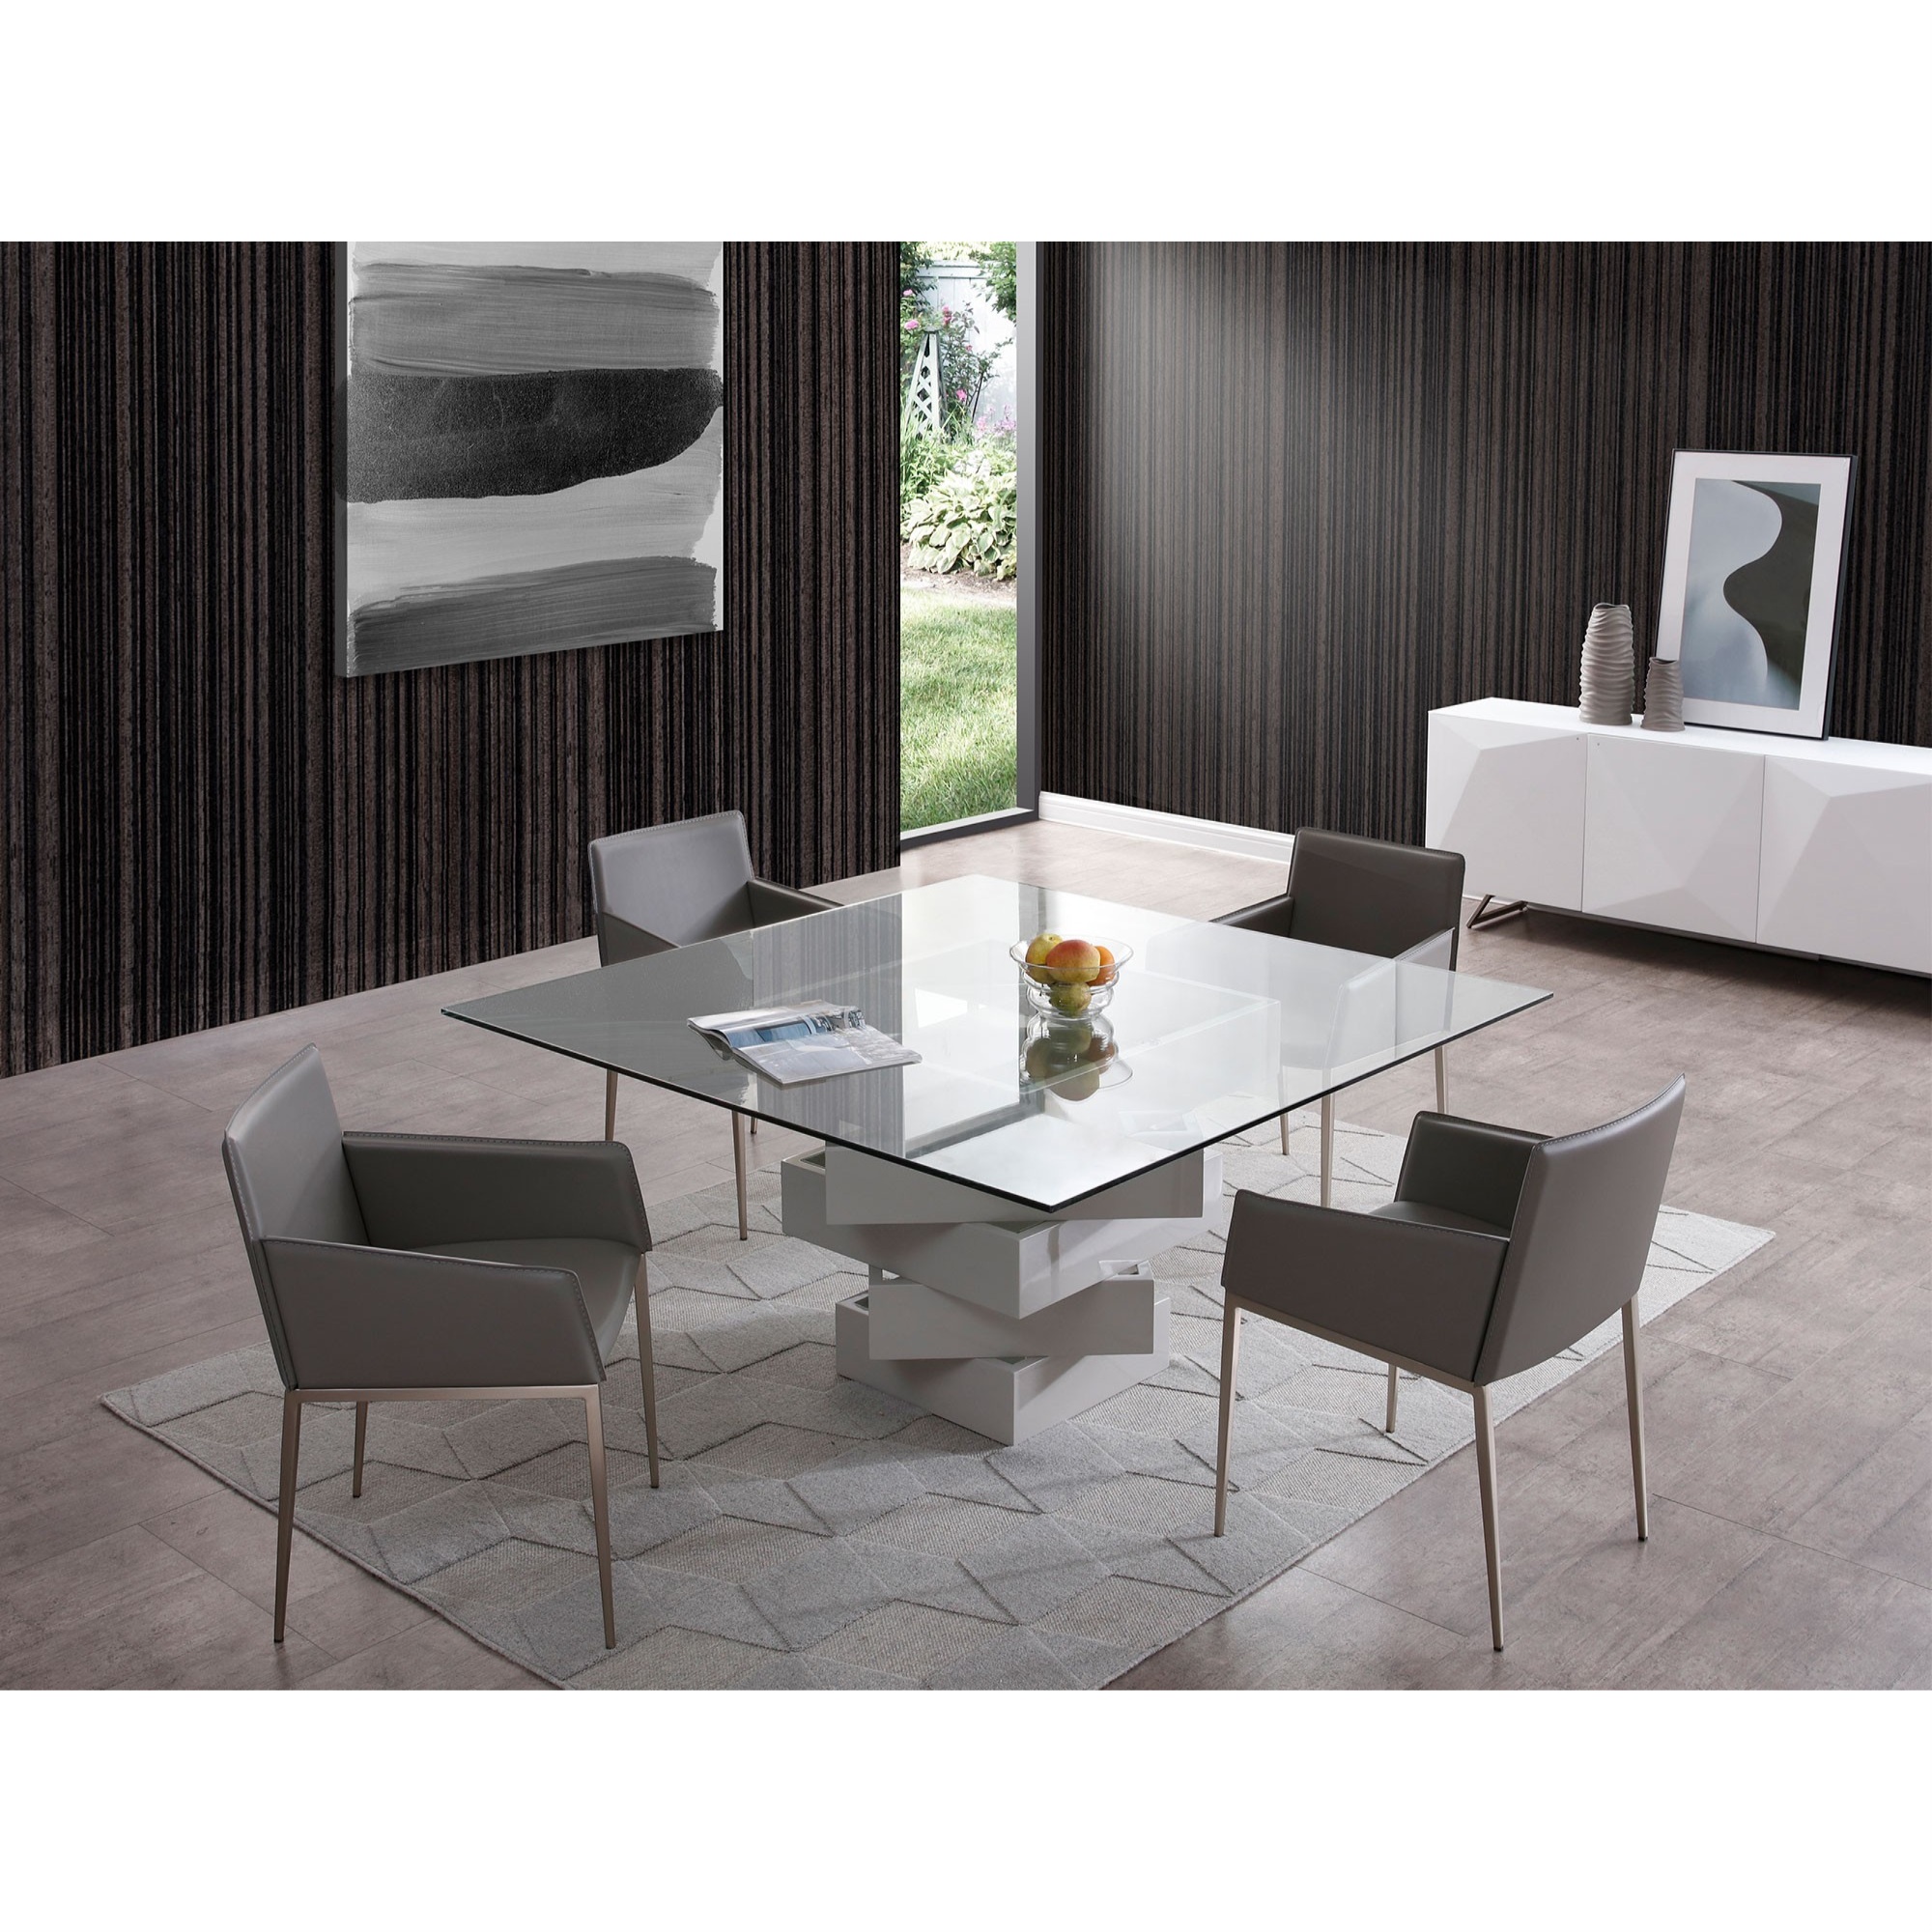 Whiteline Modern Living Carson Dining Table, high gloss gray lacquer geometric base with mirrors, 12mm clear glass top